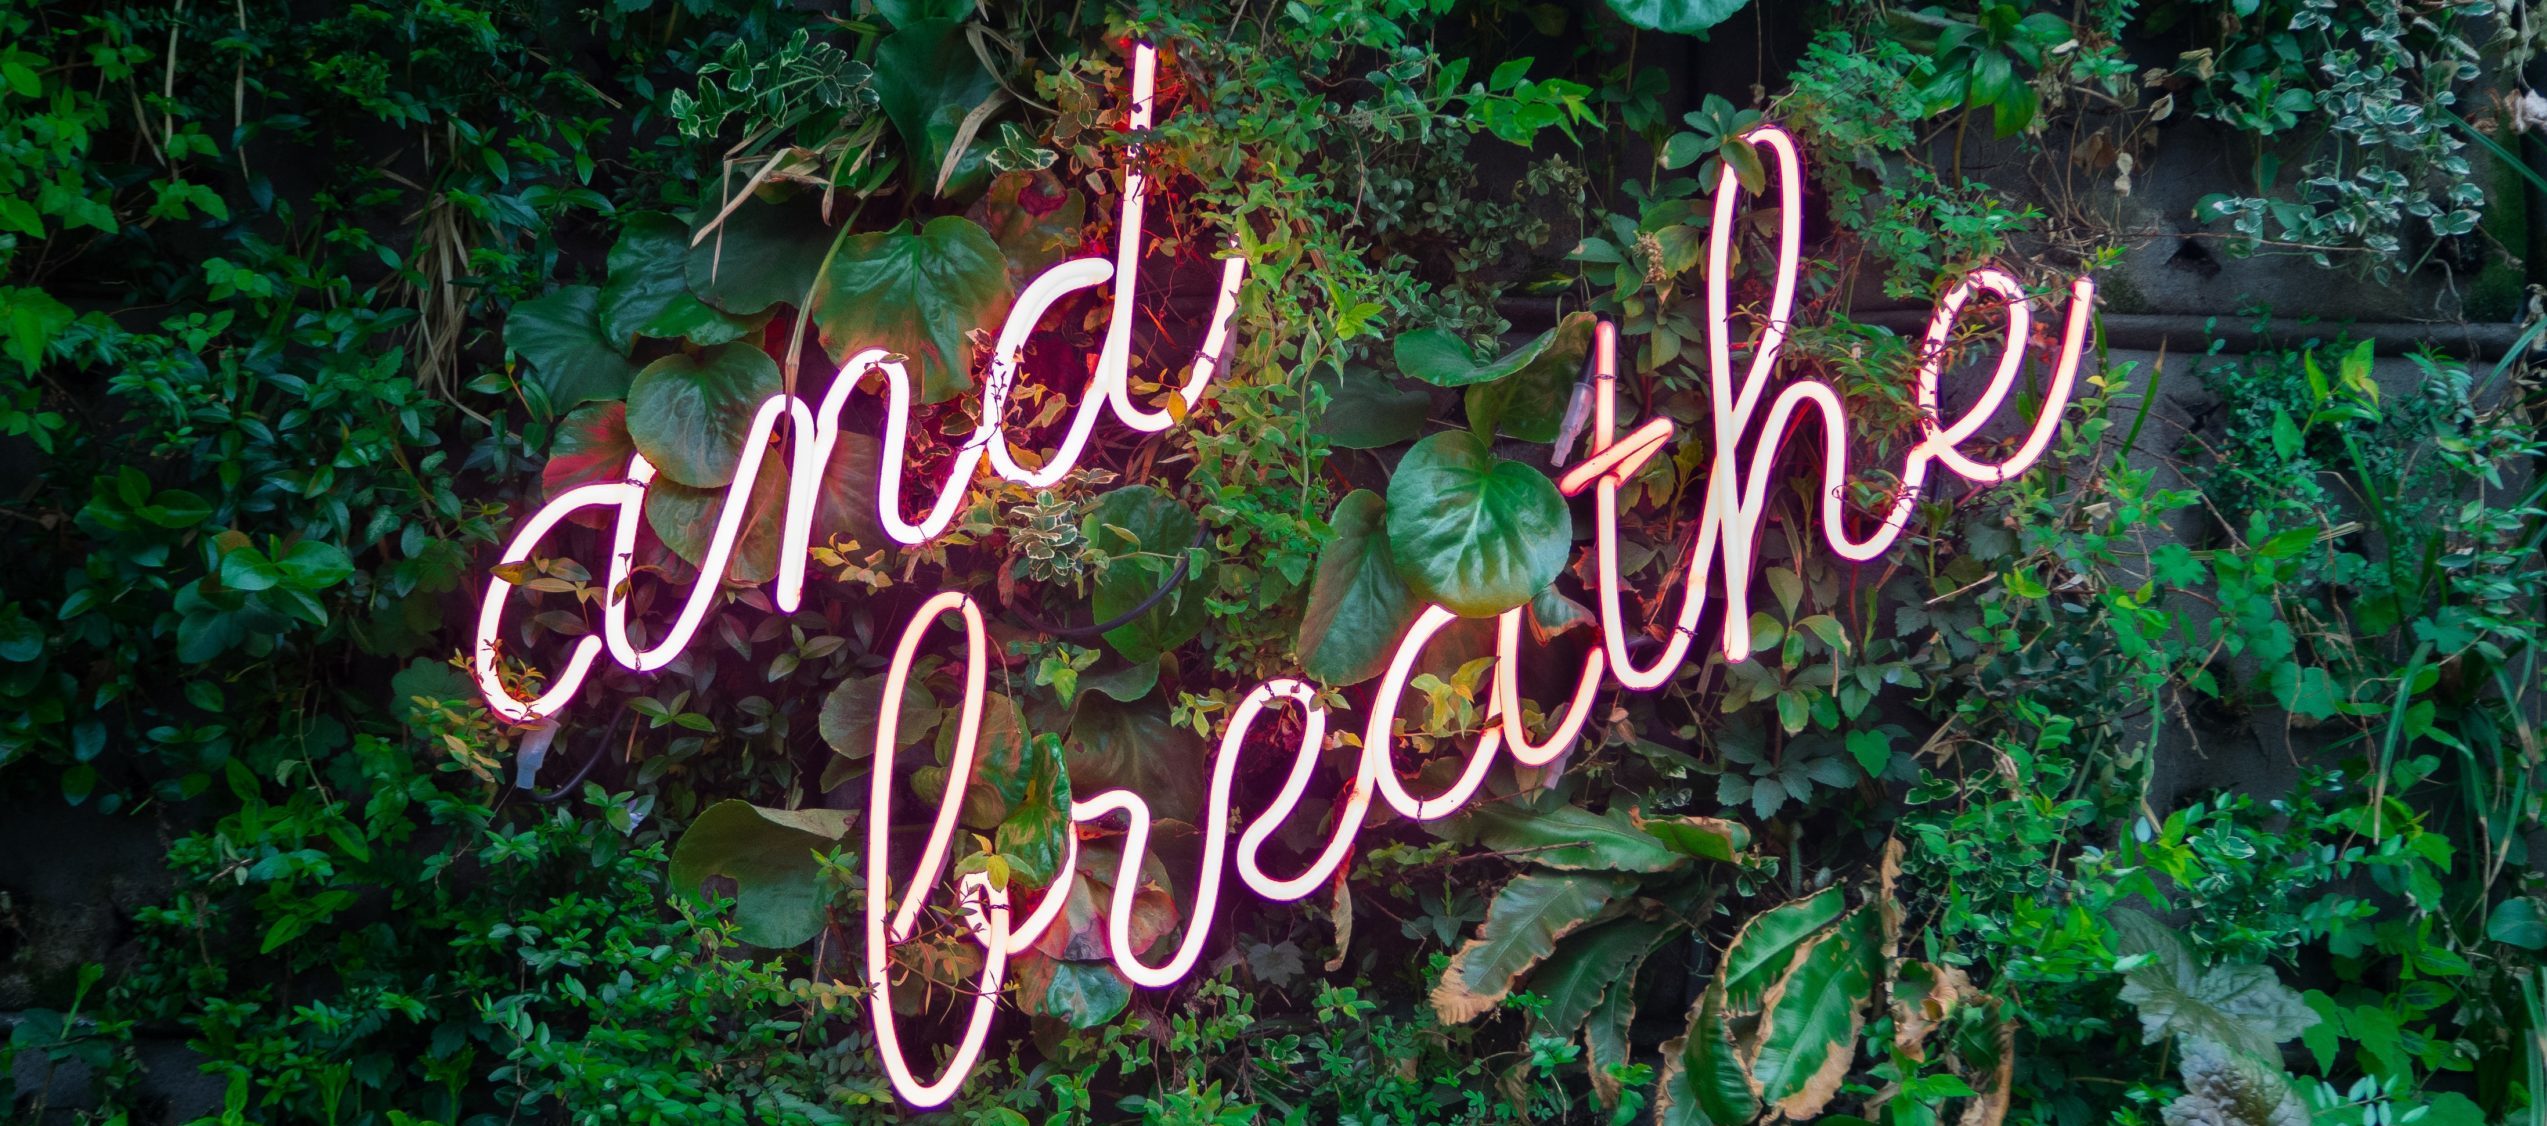 a neon sign says "and breath" with a green leafy background.